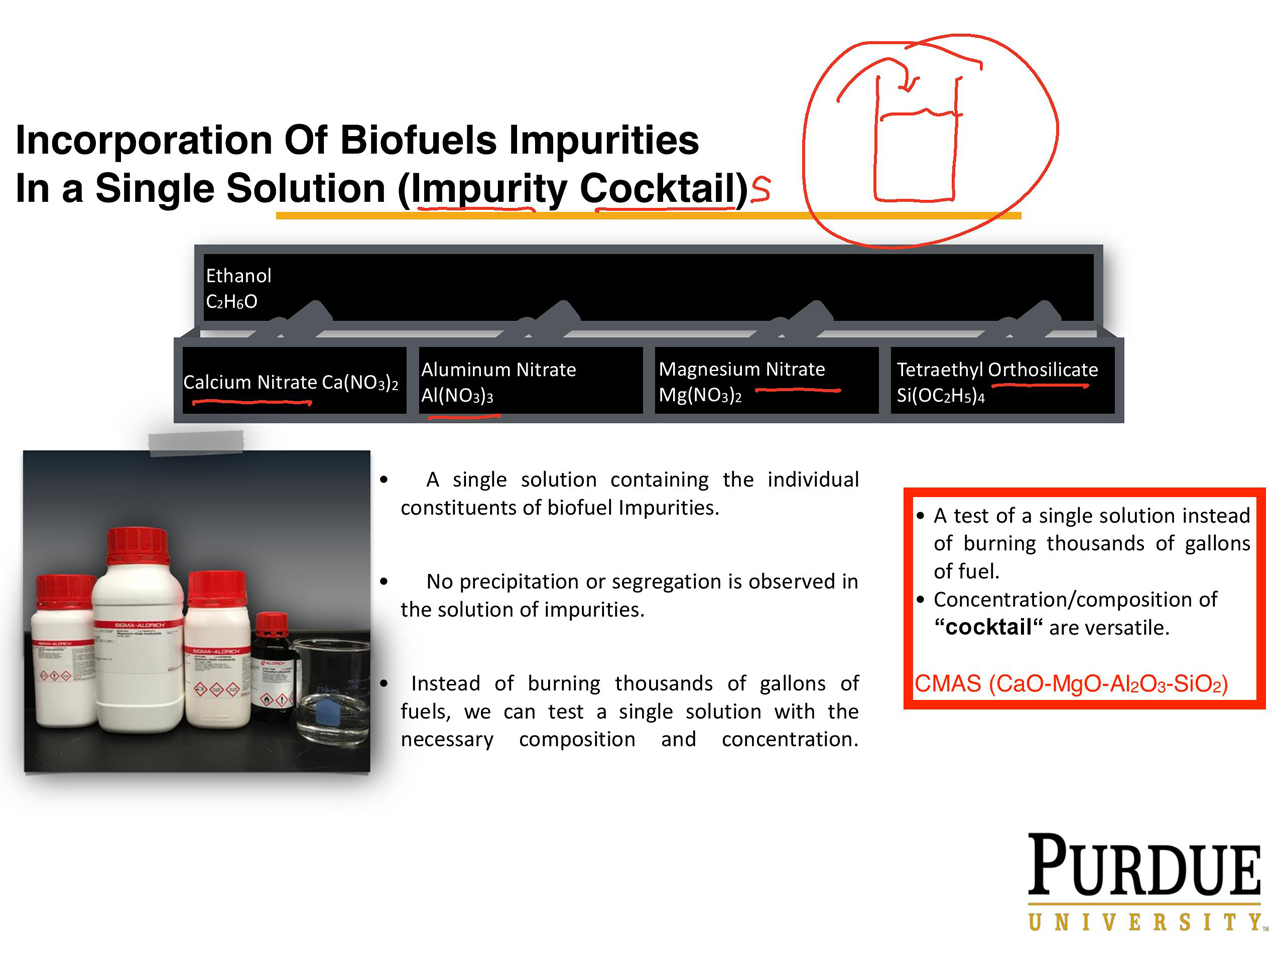 Incorporation Of Biofuels Impurities In a Single Solution (Impurity Cocktail) Ethanol C2H6O